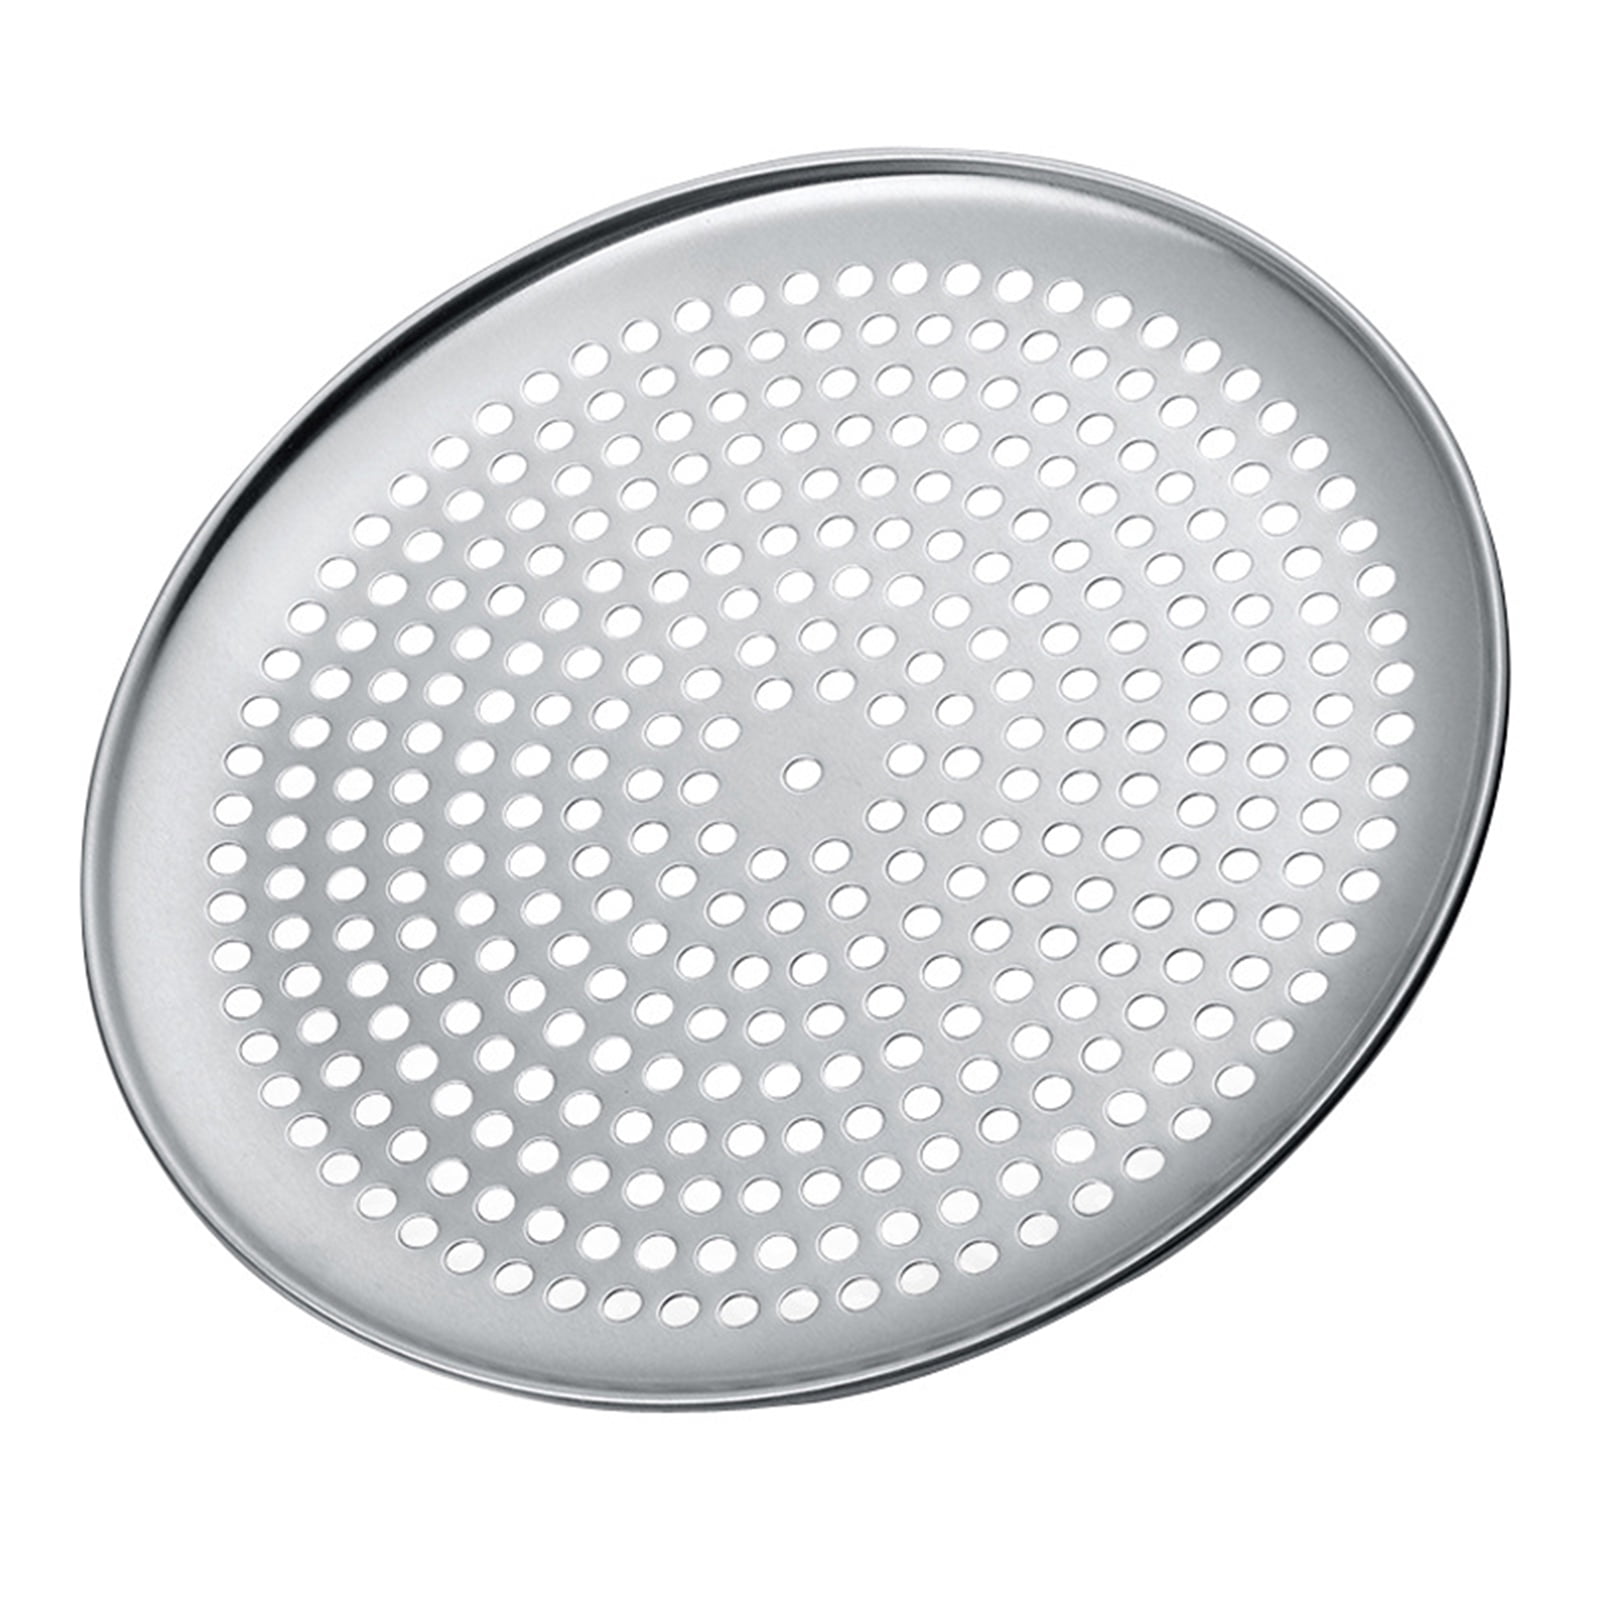 HOLES Perforated Aluminium Pizza Pans Size 7" to 18" 